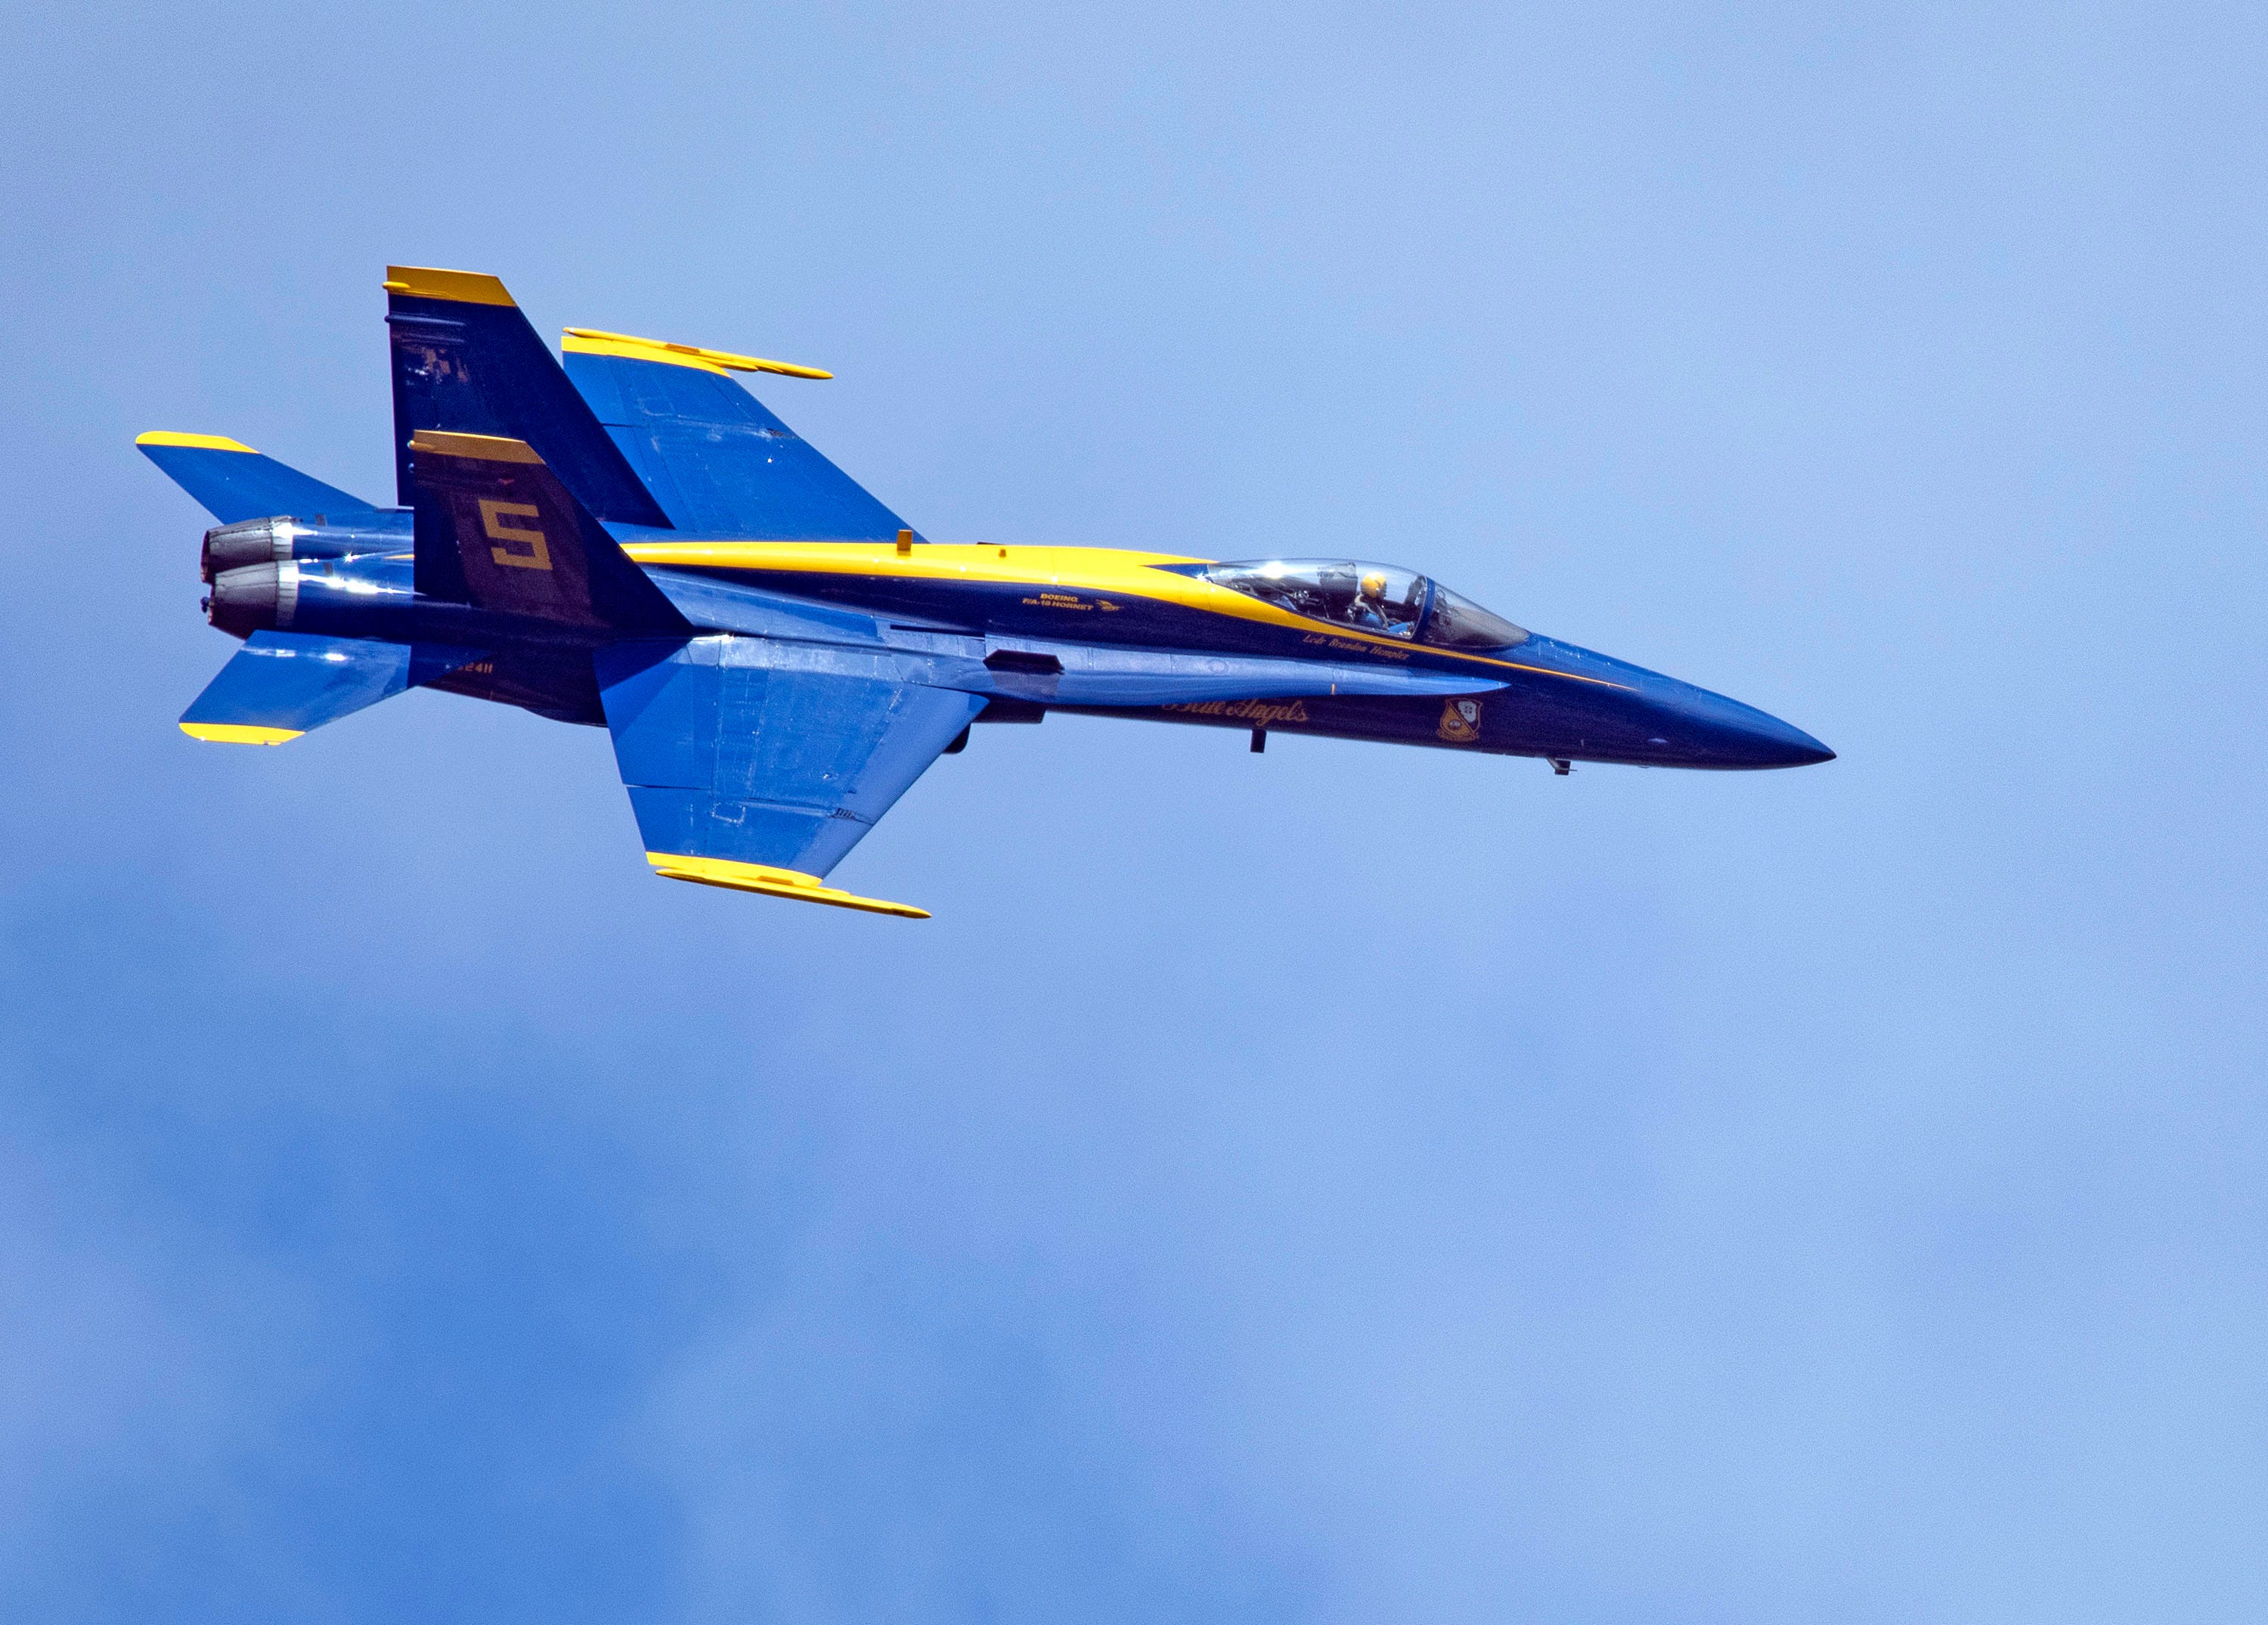 Blue Angels, Thunderbirds multicity flyover tour Here's what we know